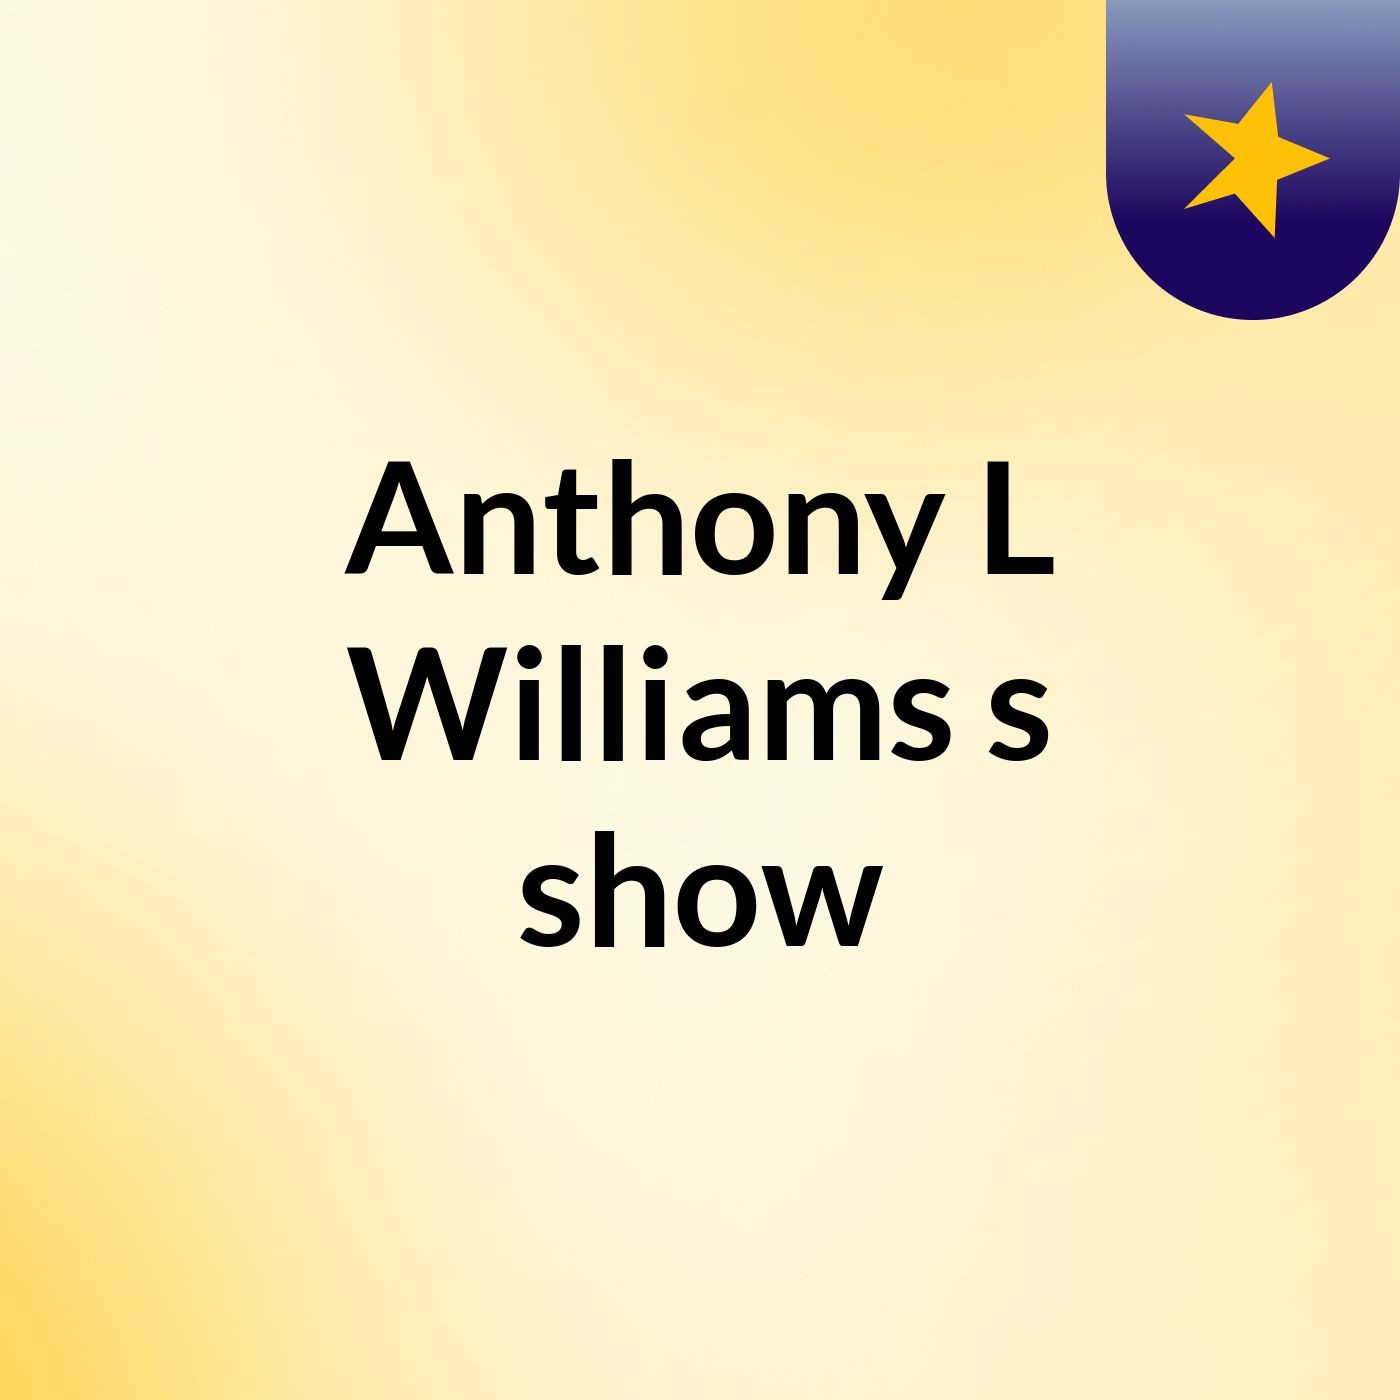 Anthony L Williams's show